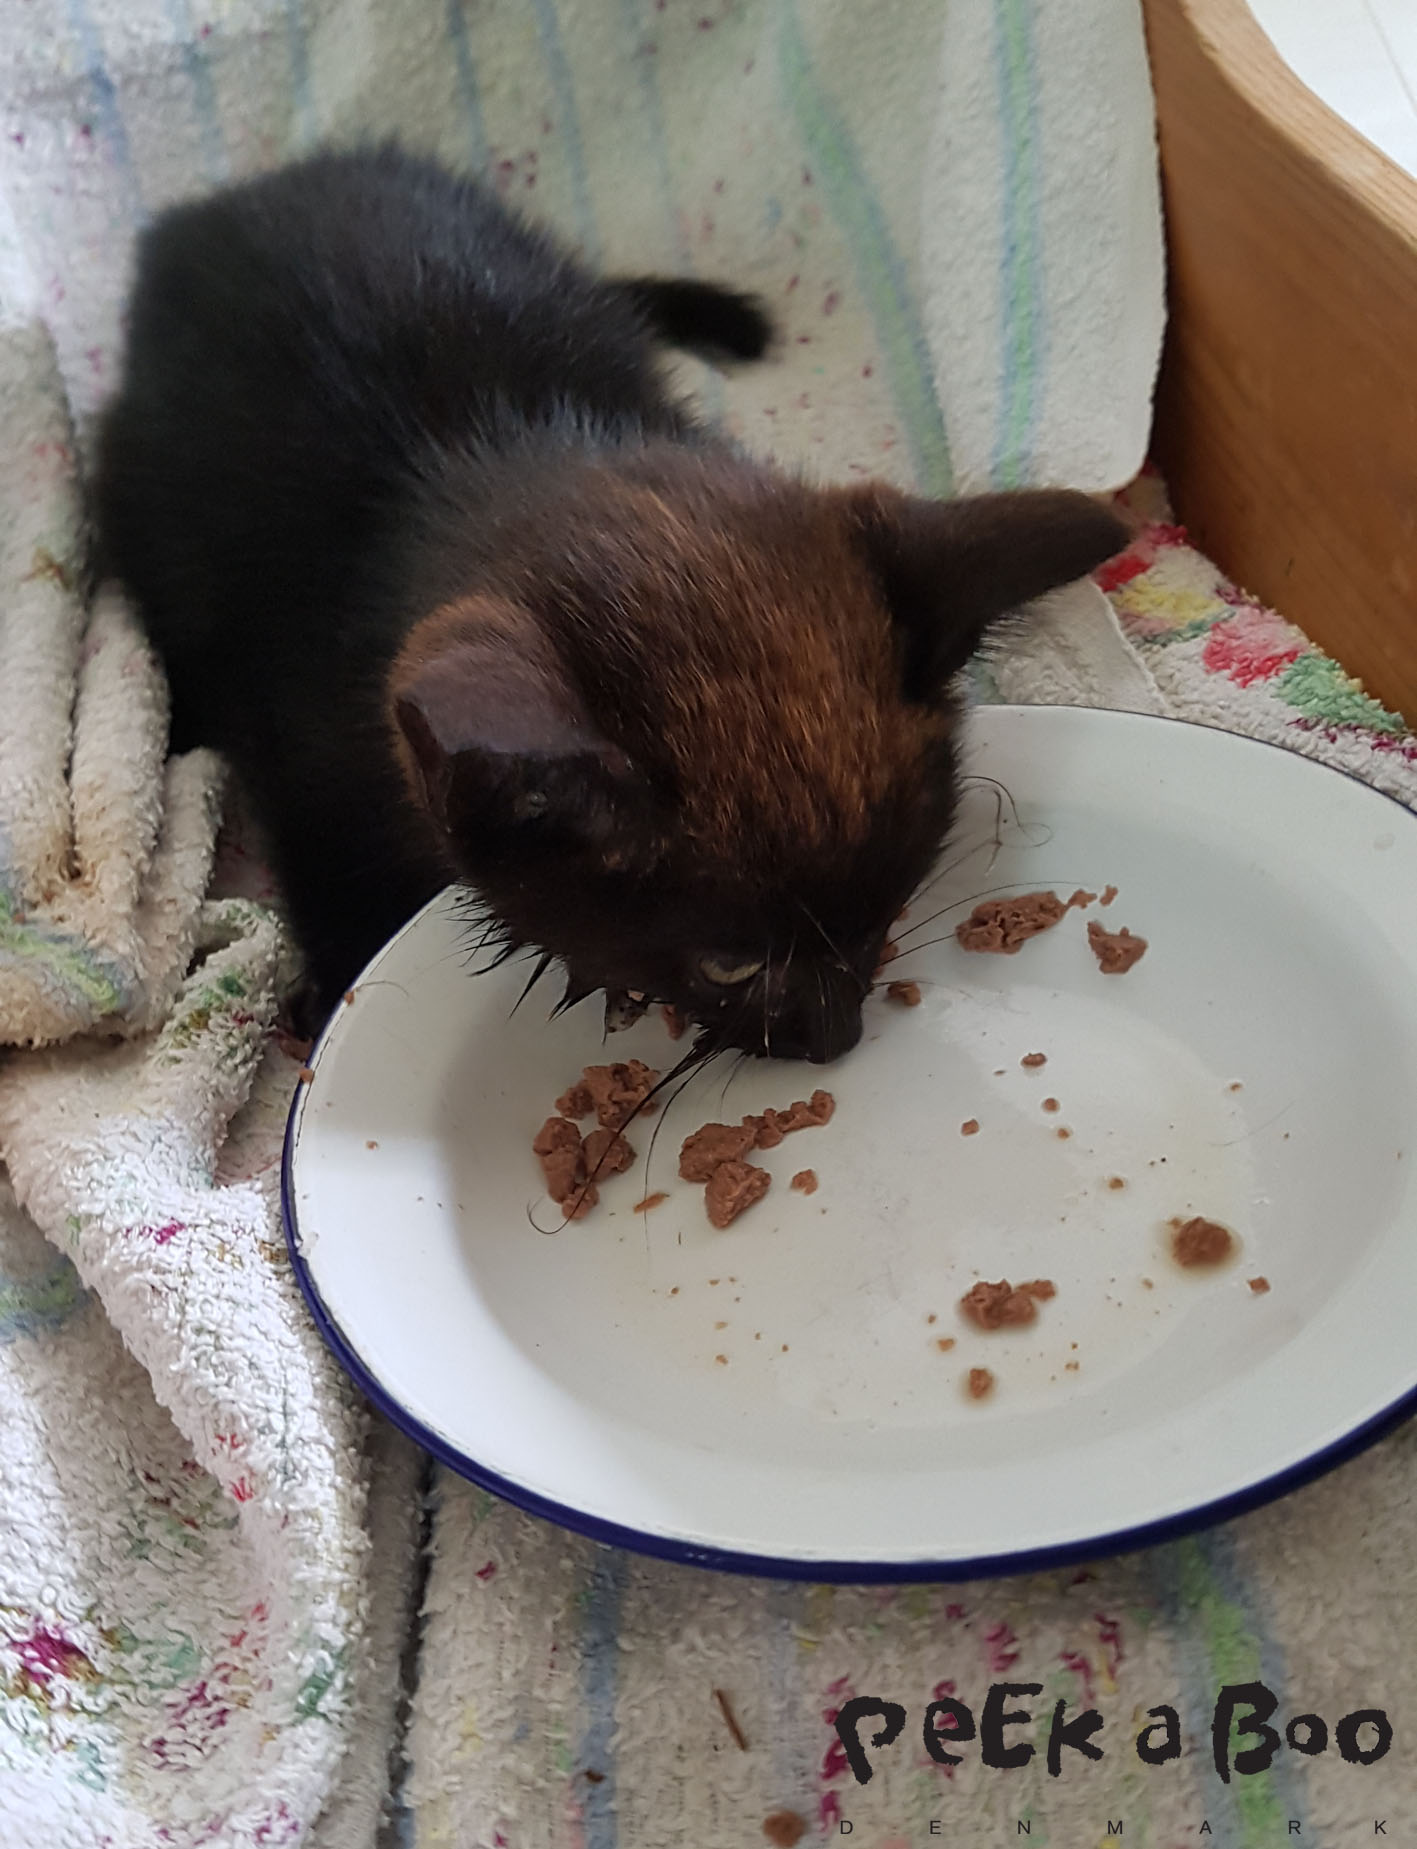 we feed the kitten and it ate as much as it could.